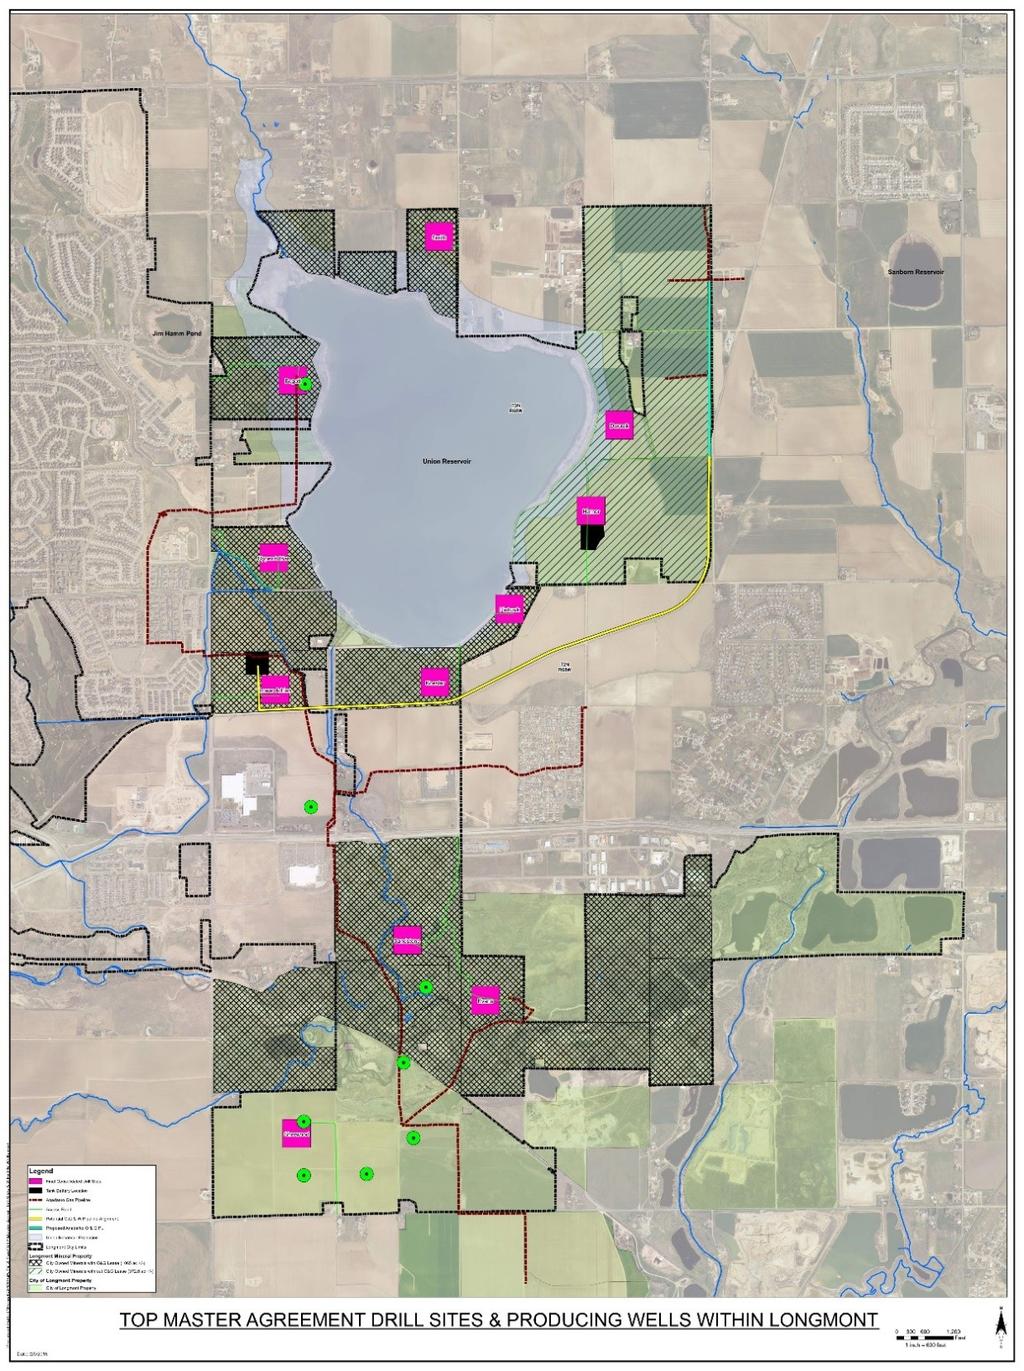 PHASING OUT OF OIL AND GAS FACILITIES Sites Removed: - Sandstone - Evans - Sherwood - Bogott - Dworak - Upper Adrian - Hernor - Pietrzak - Lower Smith Sites Adrian Remain: - Koester - Olander Knight